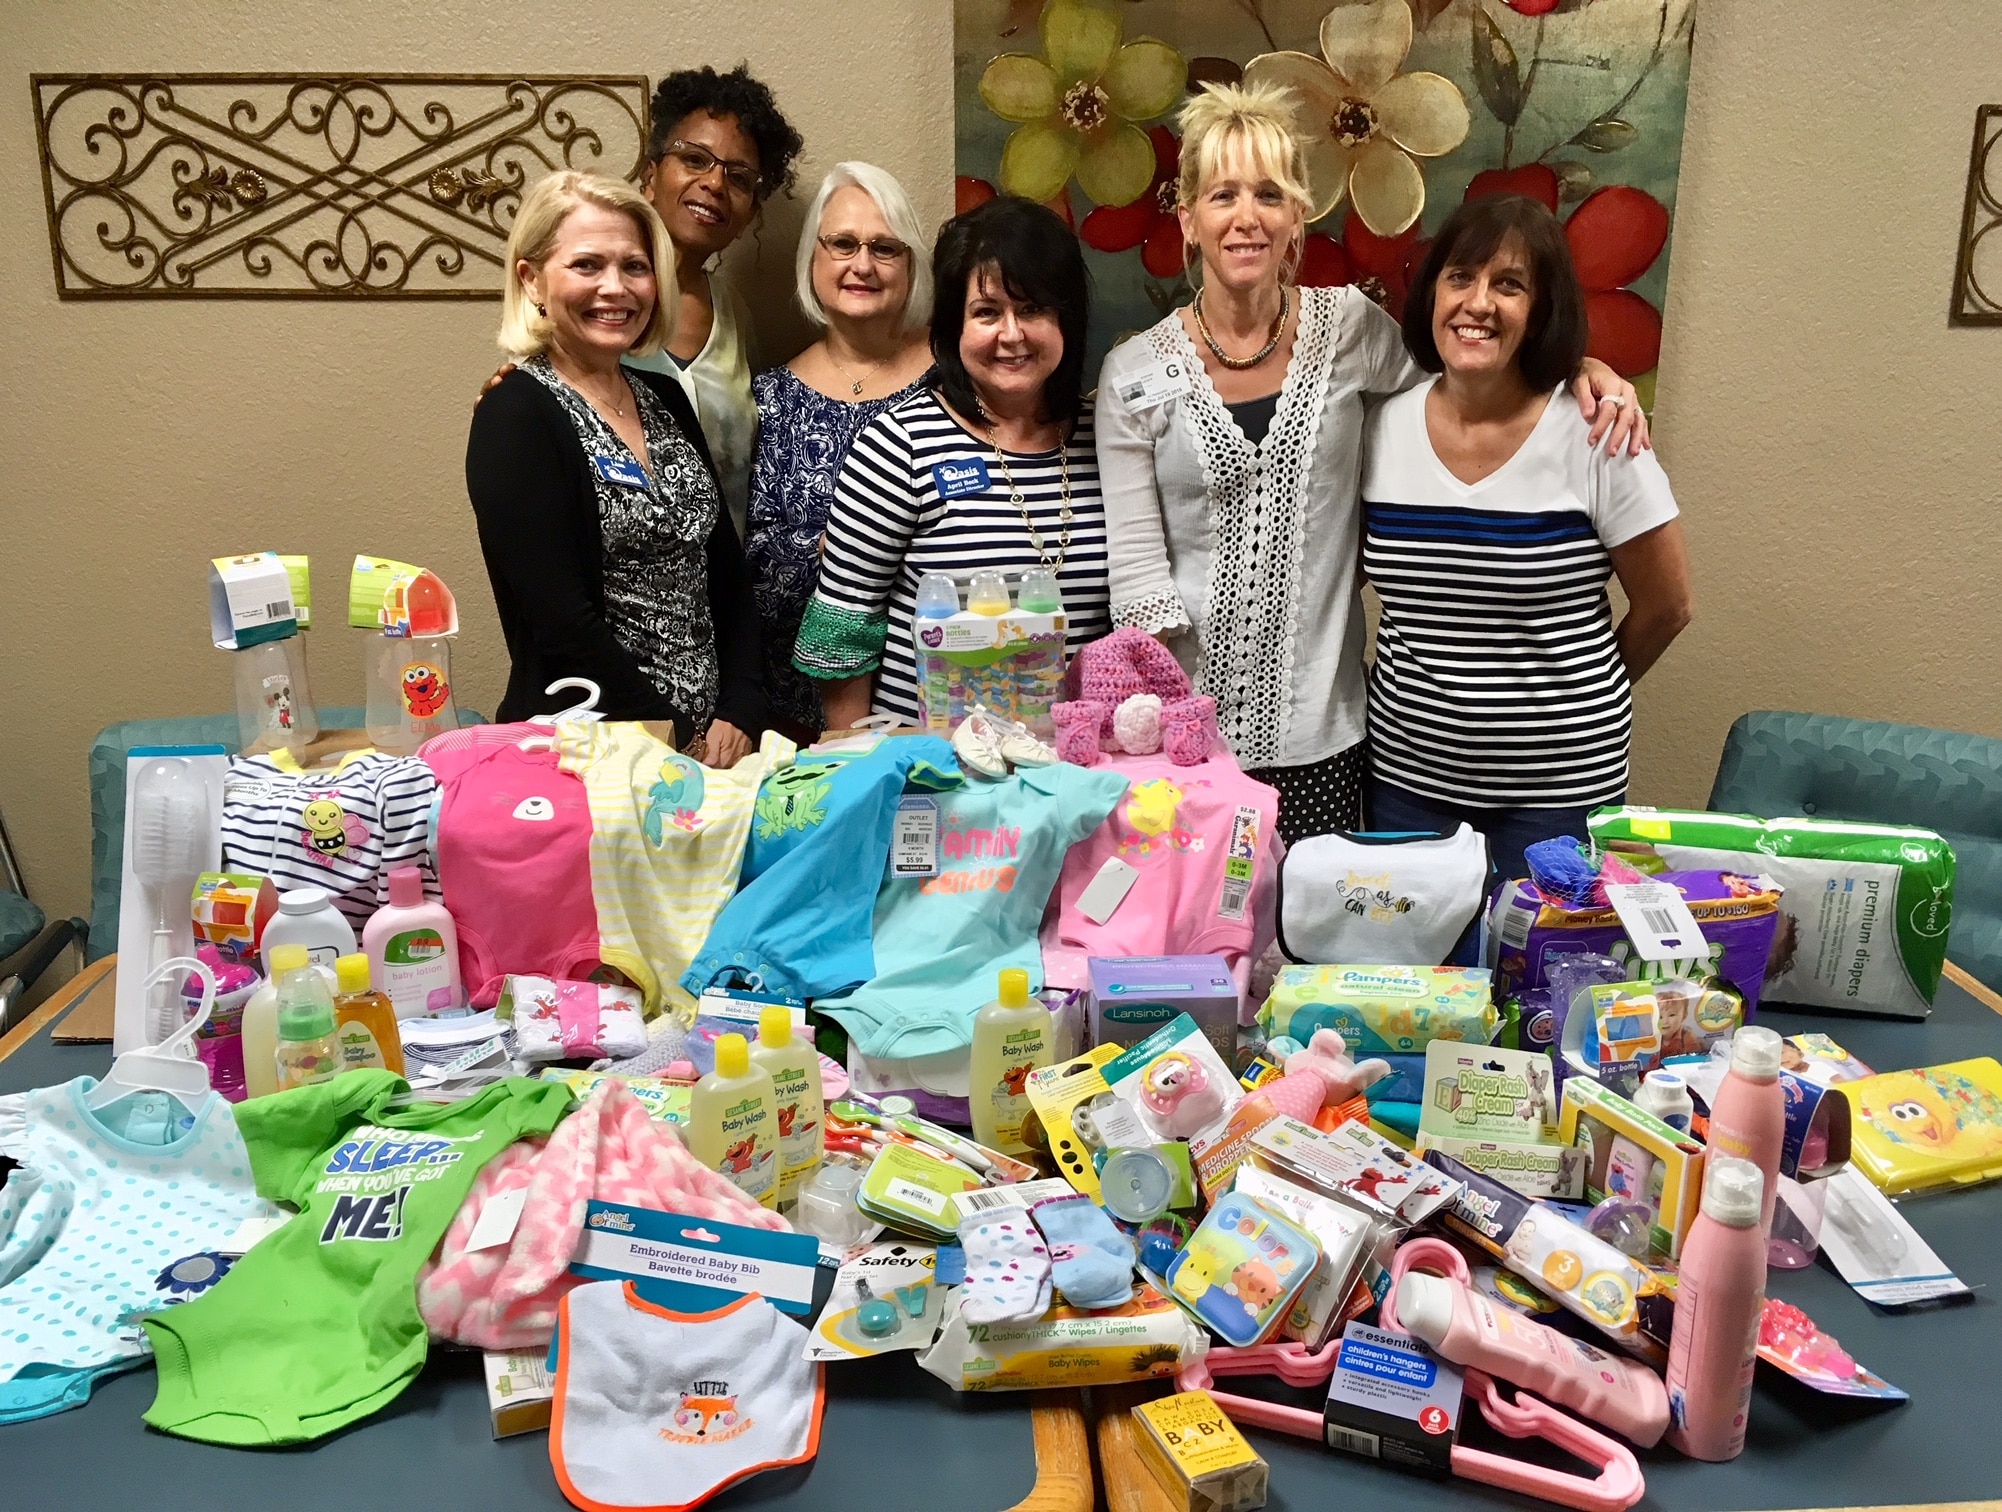 Donation to Pregnancy Center Highlight’s the Generosity of KU’s New Port Richey Campus Team